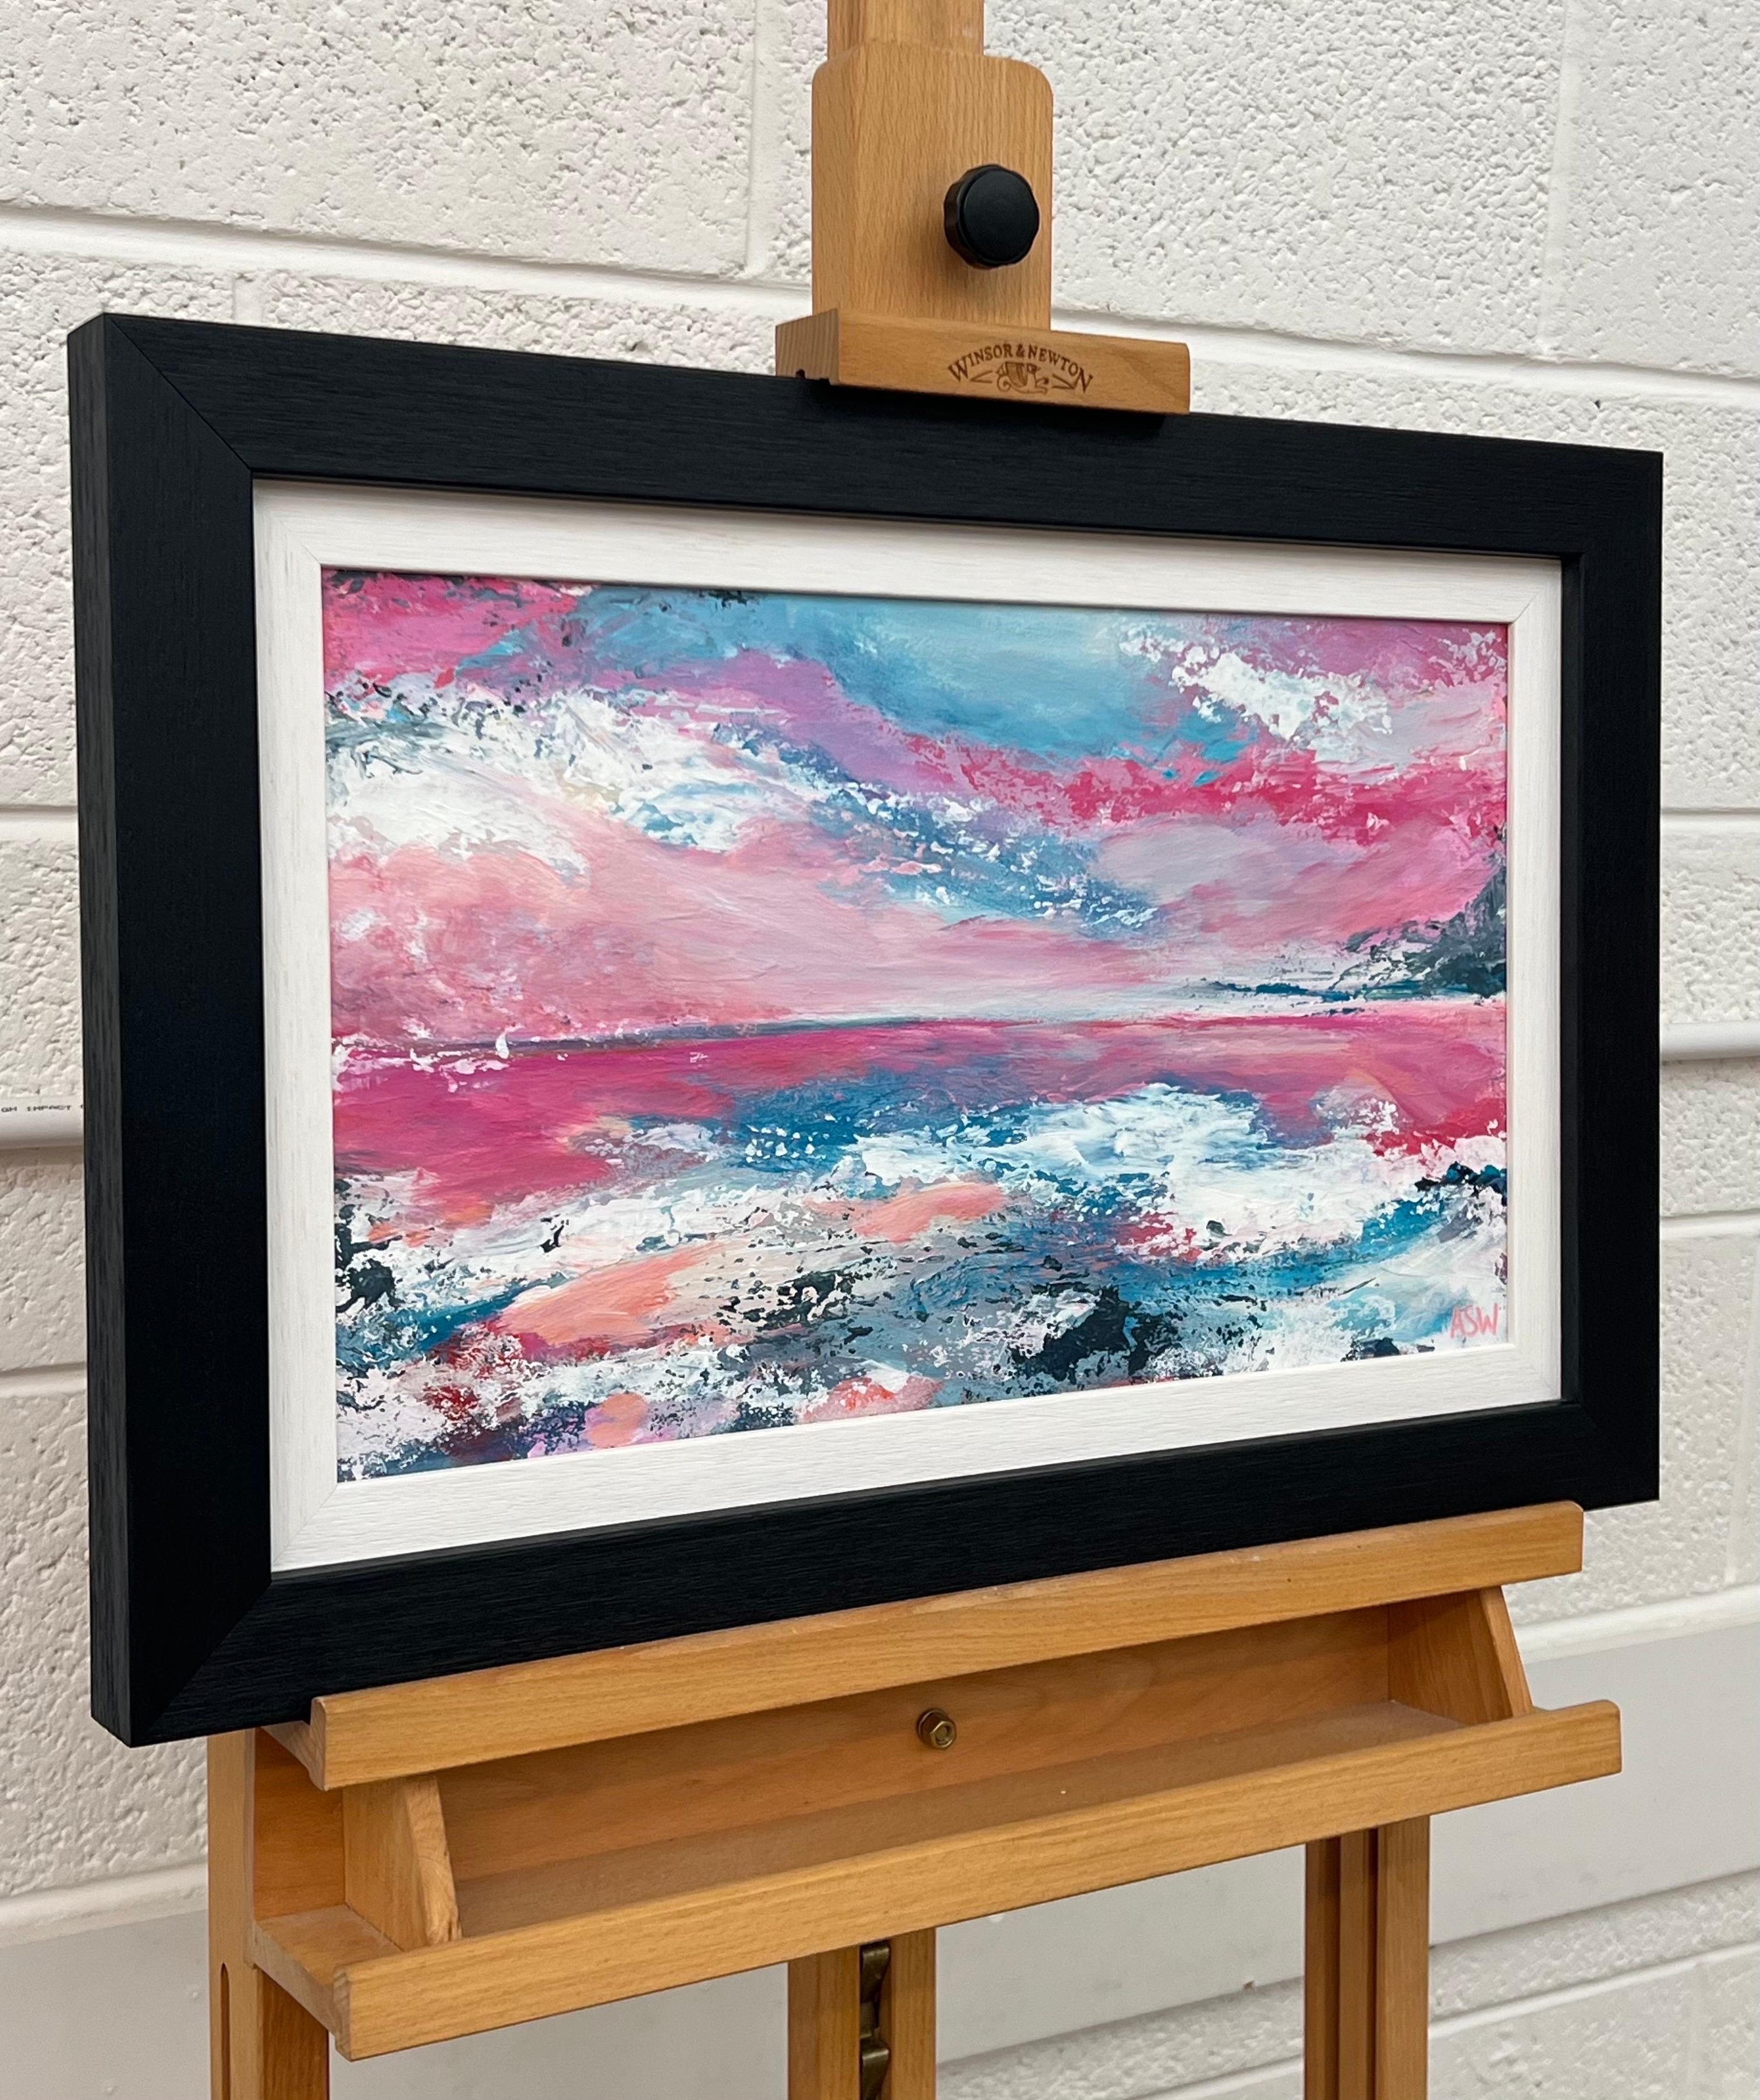 Abstract Landscape Seascape Painting with Pink & Blue Sky by Leading British Painter, Angela Wakefield

Art measures 18 x 12 inches 
Frame measures 22 x 16 inches 

Angela Wakefield has twice been on the front cover of ‘Art of England’ and featured